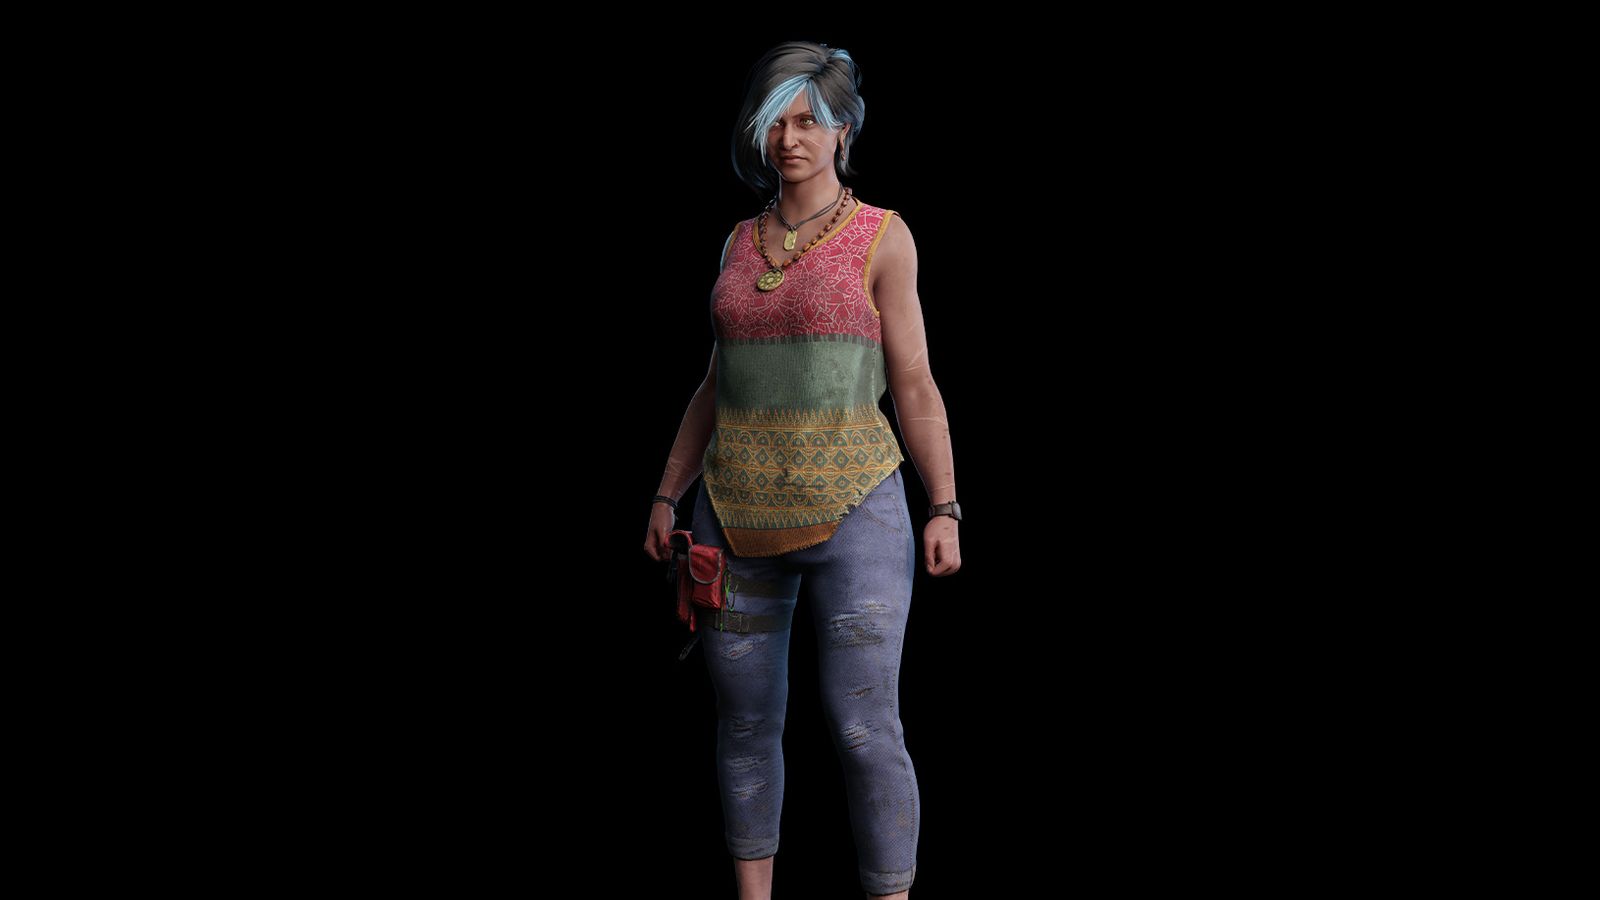 A 3/4 view of Haddie Kaur, showing off her whole outfit and what she looks like. An indian woman, wearing a striped vest and blue jeans.